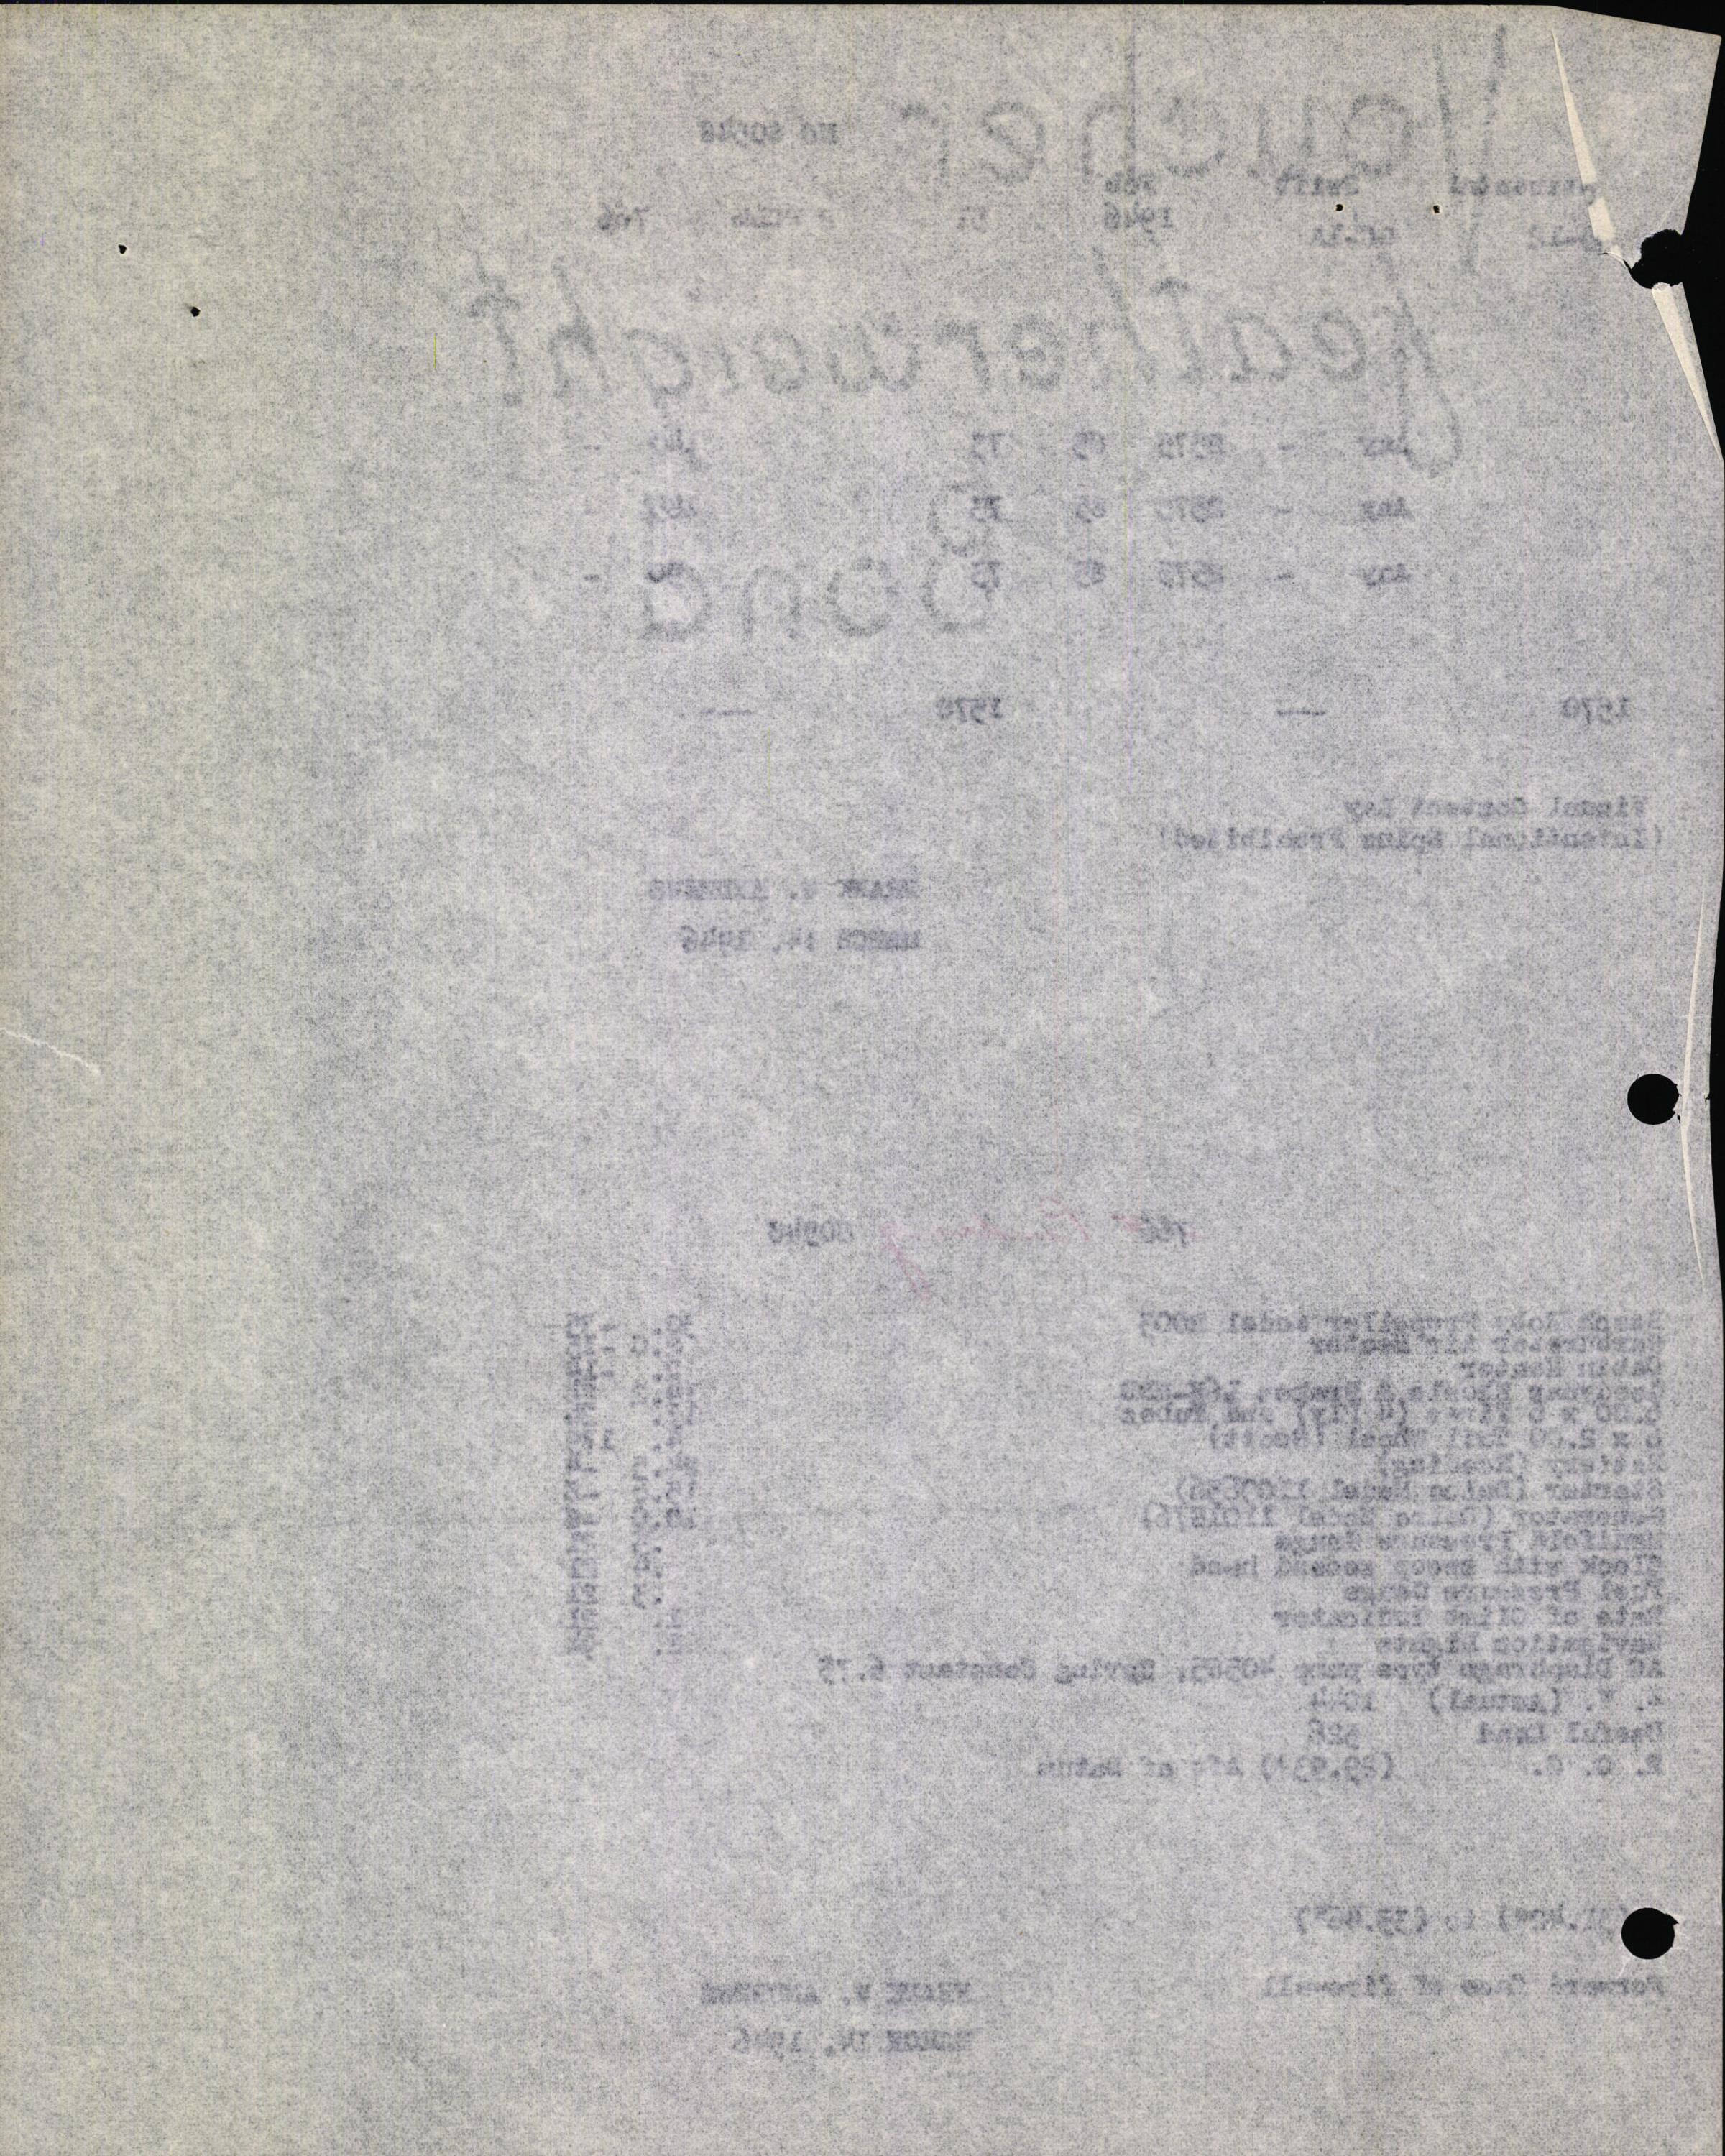 Sample page 6 from AirCorps Library document: Technical Information for Serial Number 51